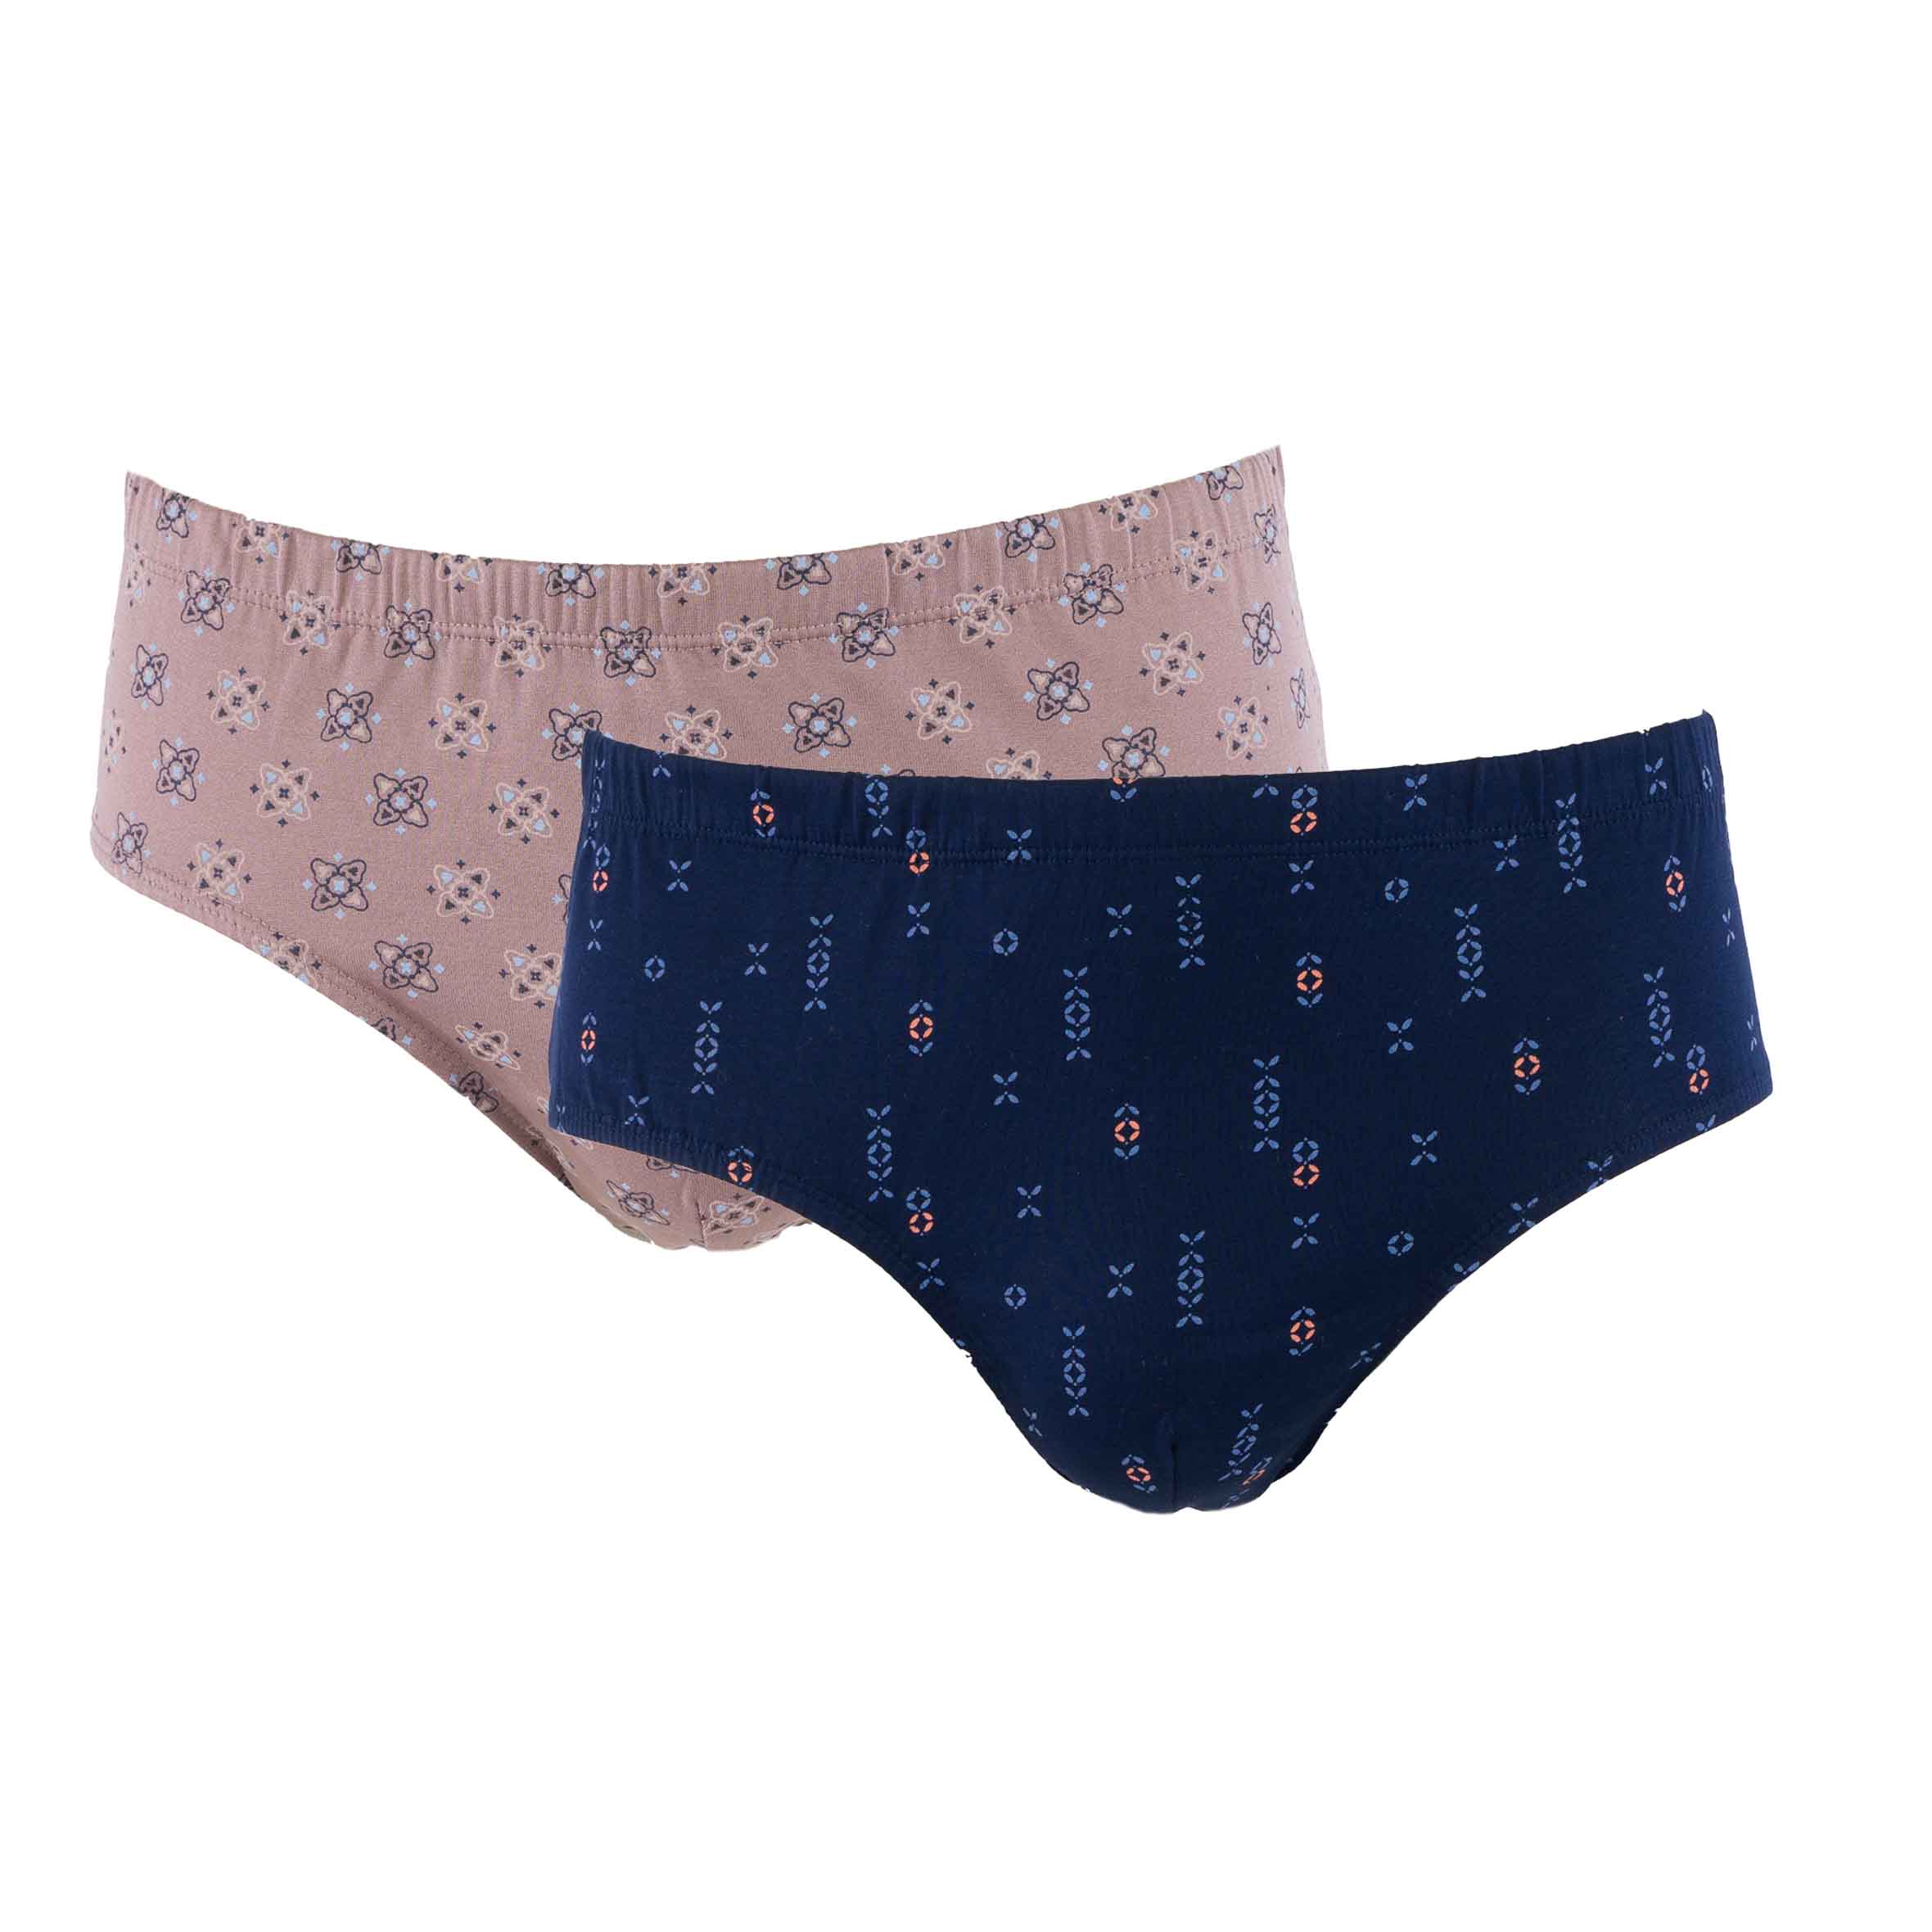 Pack of 2 HIGH Waist Briefs in Mercerized Cotton Jersey with NAVY and MOKA Print